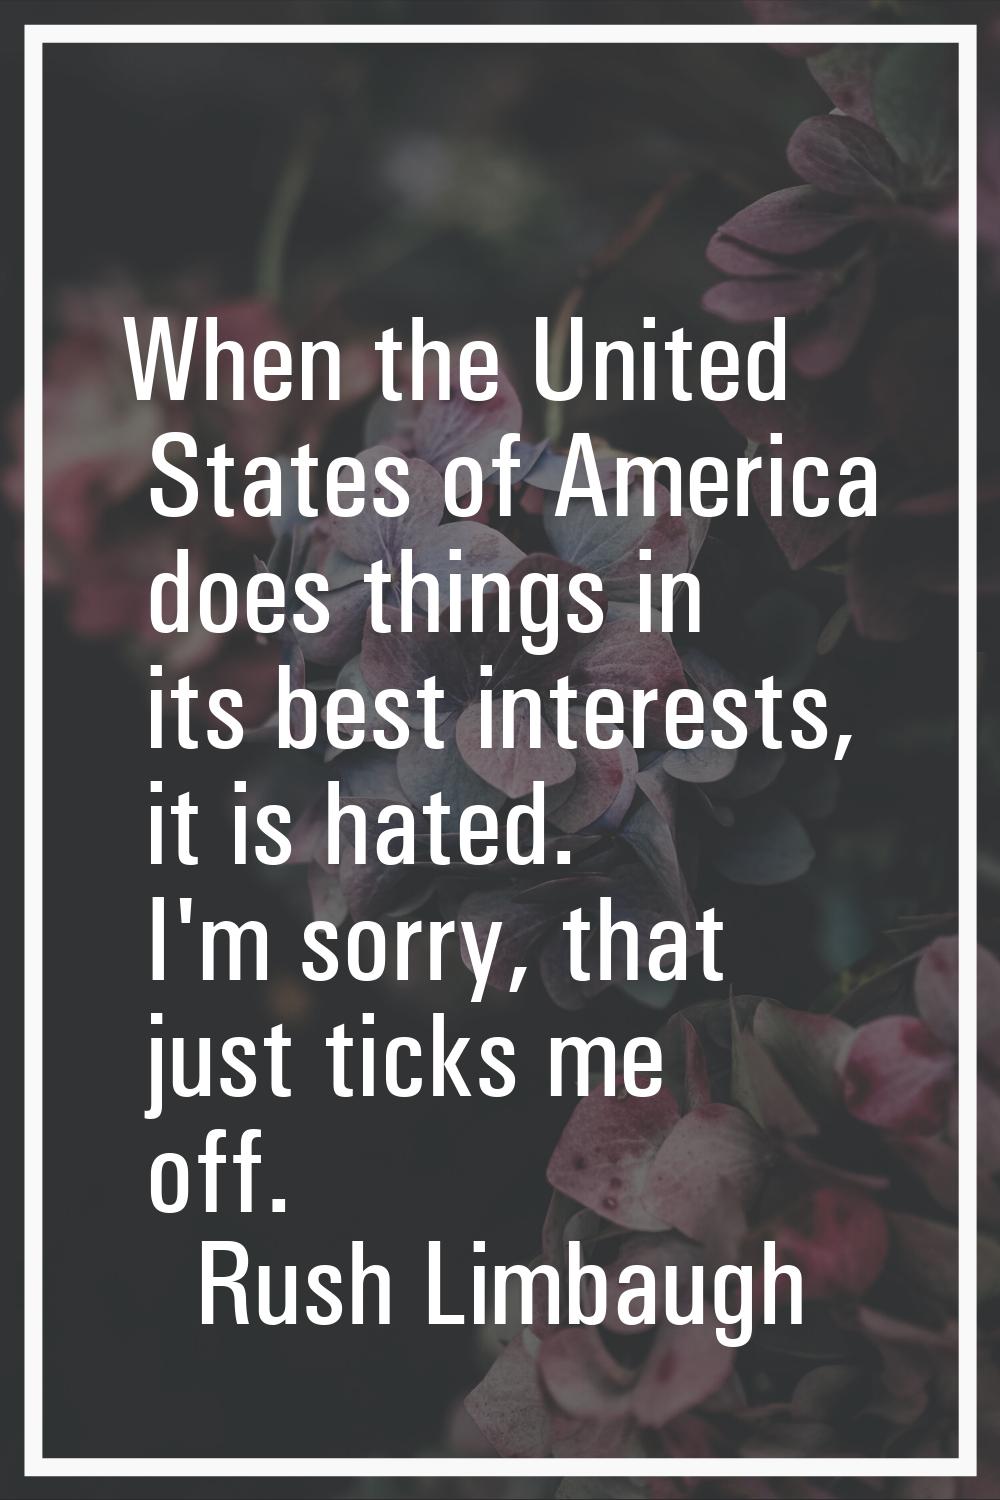 When the United States of America does things in its best interests, it is hated. I'm sorry, that j